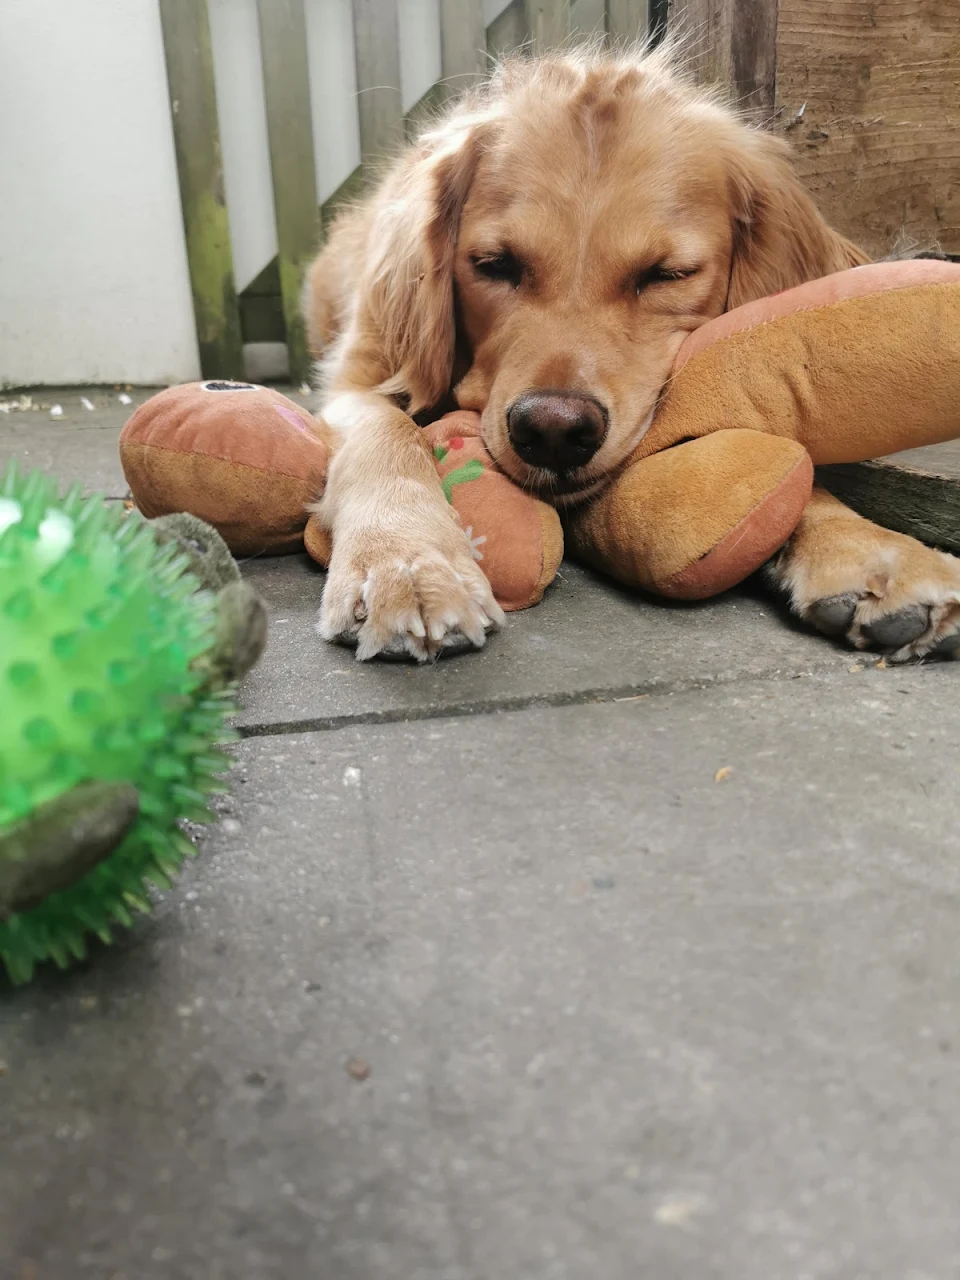 My boy taking a snooze on his favourite toy